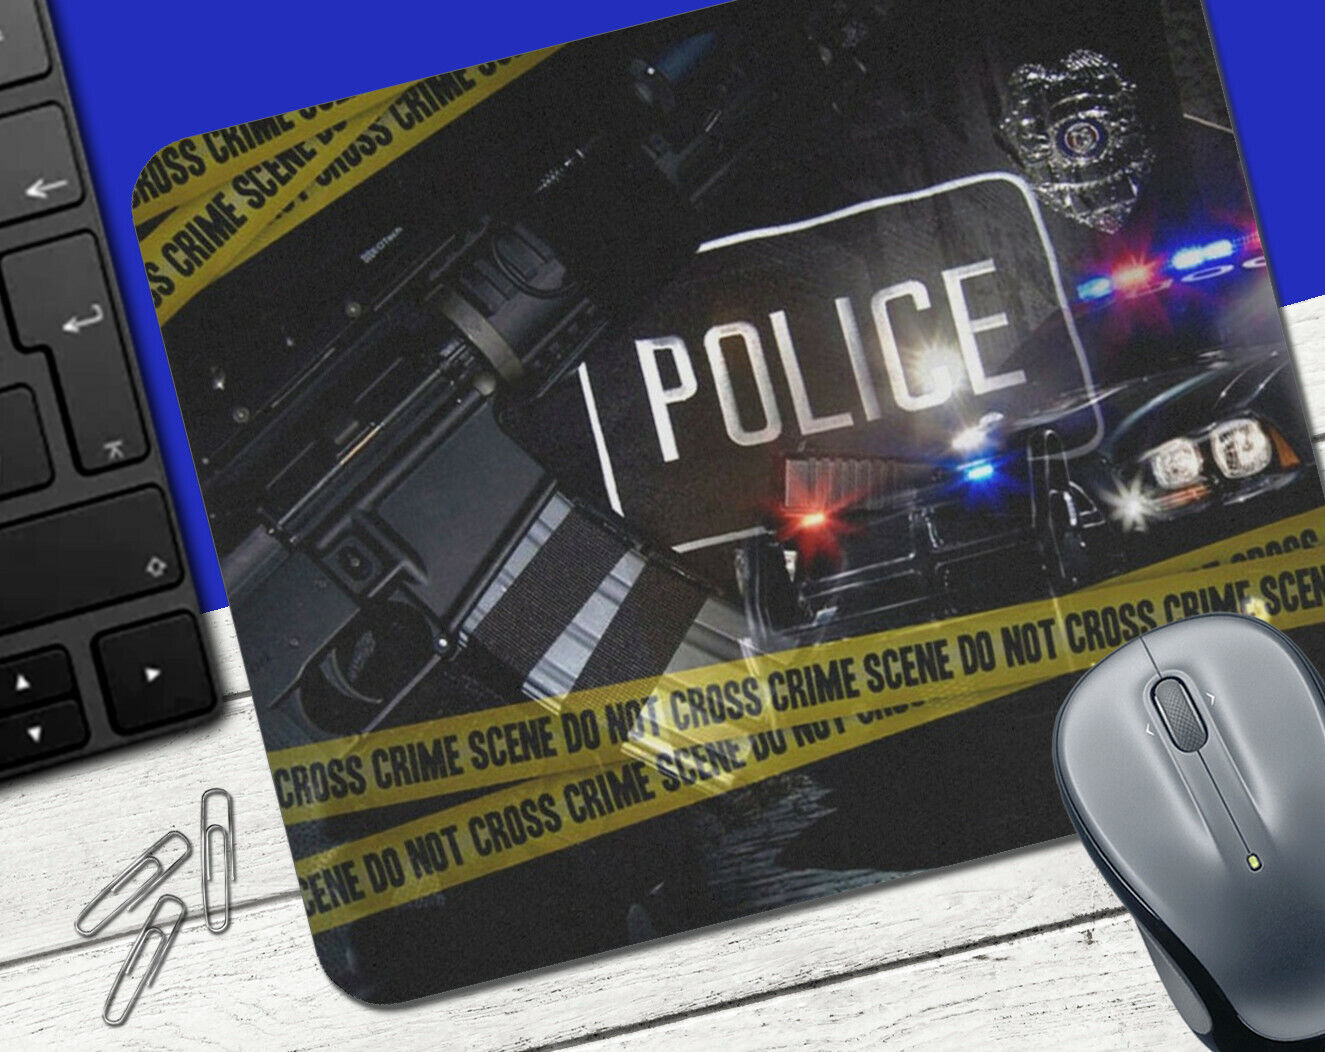 MOUSE PAD - Police #26 Cop Officer Crime Scene Tape Thin Blue Line Flag Gift